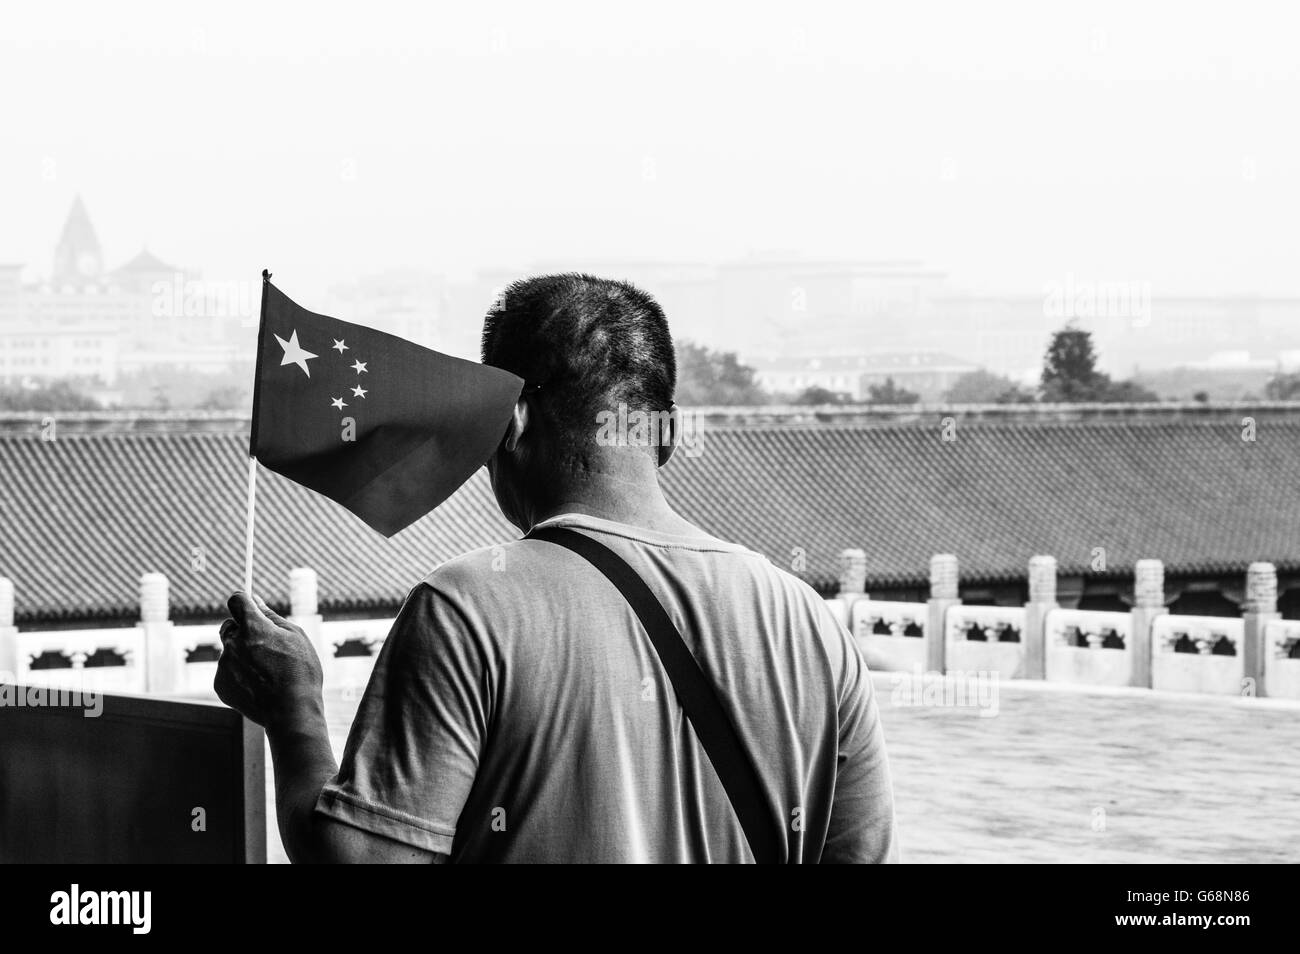 Rear View of Men Holding a China Flag Against Forbidden City Roofs Stock Photo